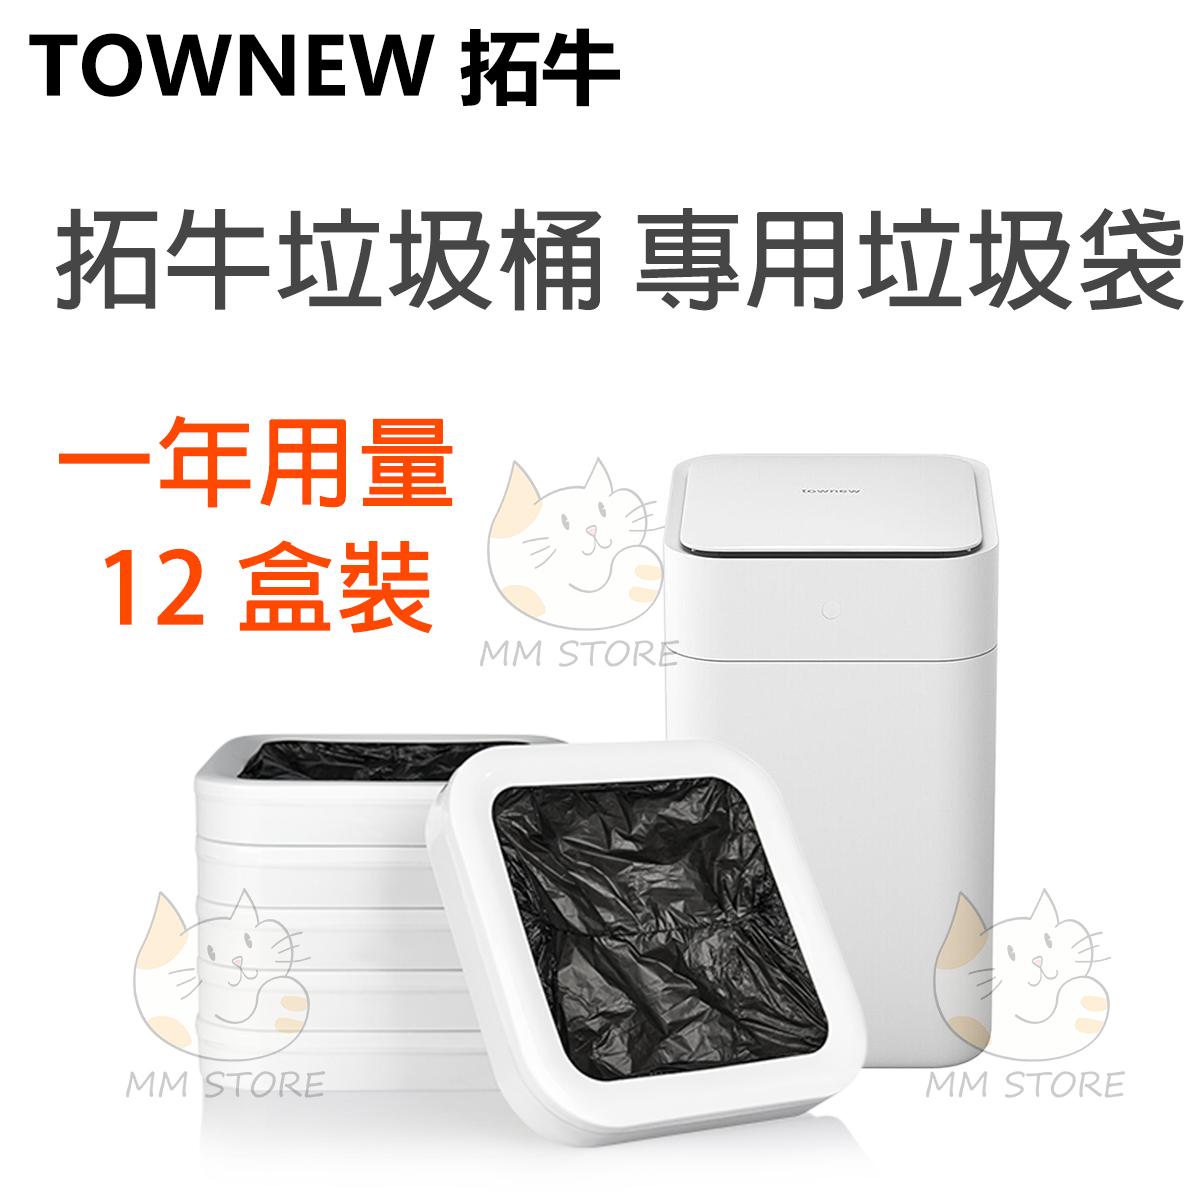 【12 Boxes】Townew Smart Garbage Bin Special Garbage Bag Automatically Sealing and Changing Bags for